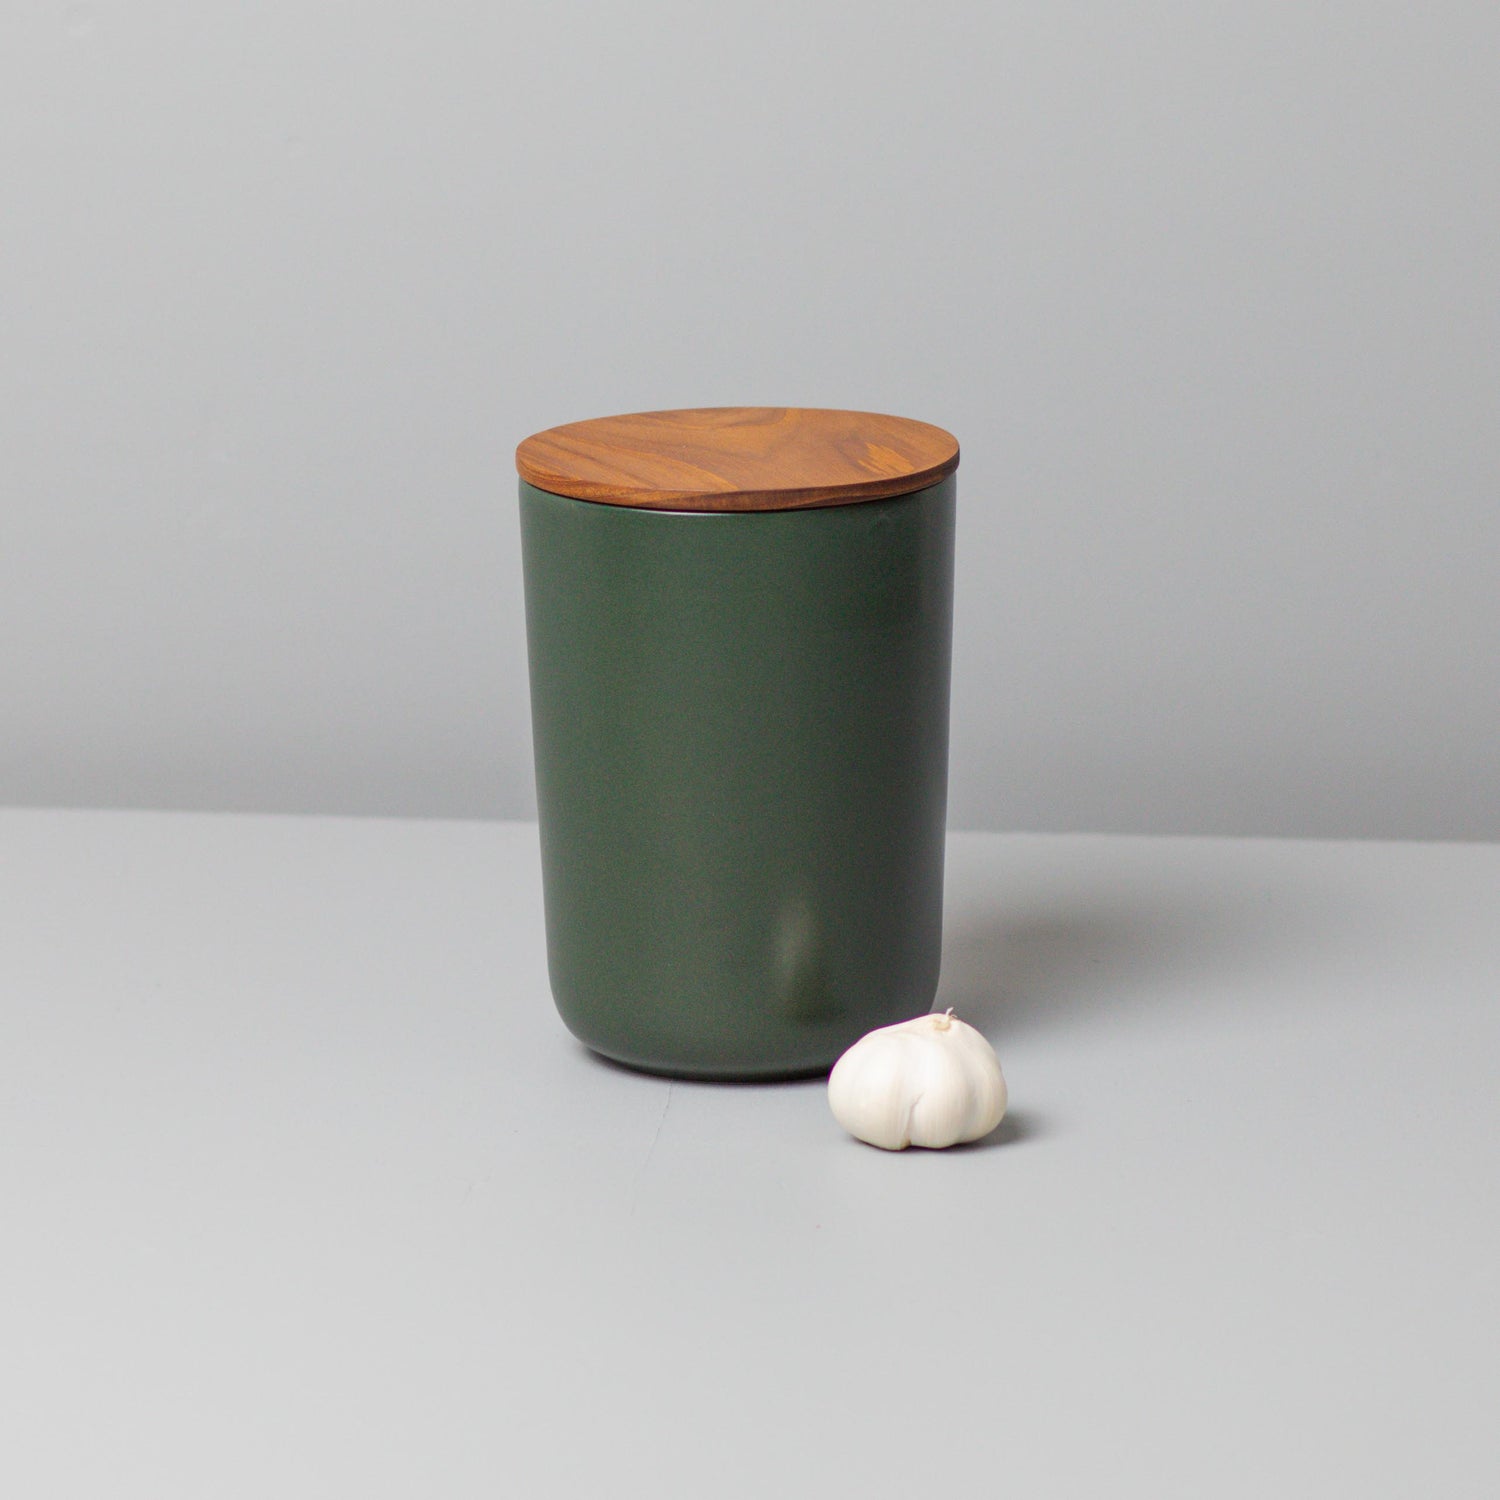 Brampton Stoneware Canister Set of 3, Forest Green